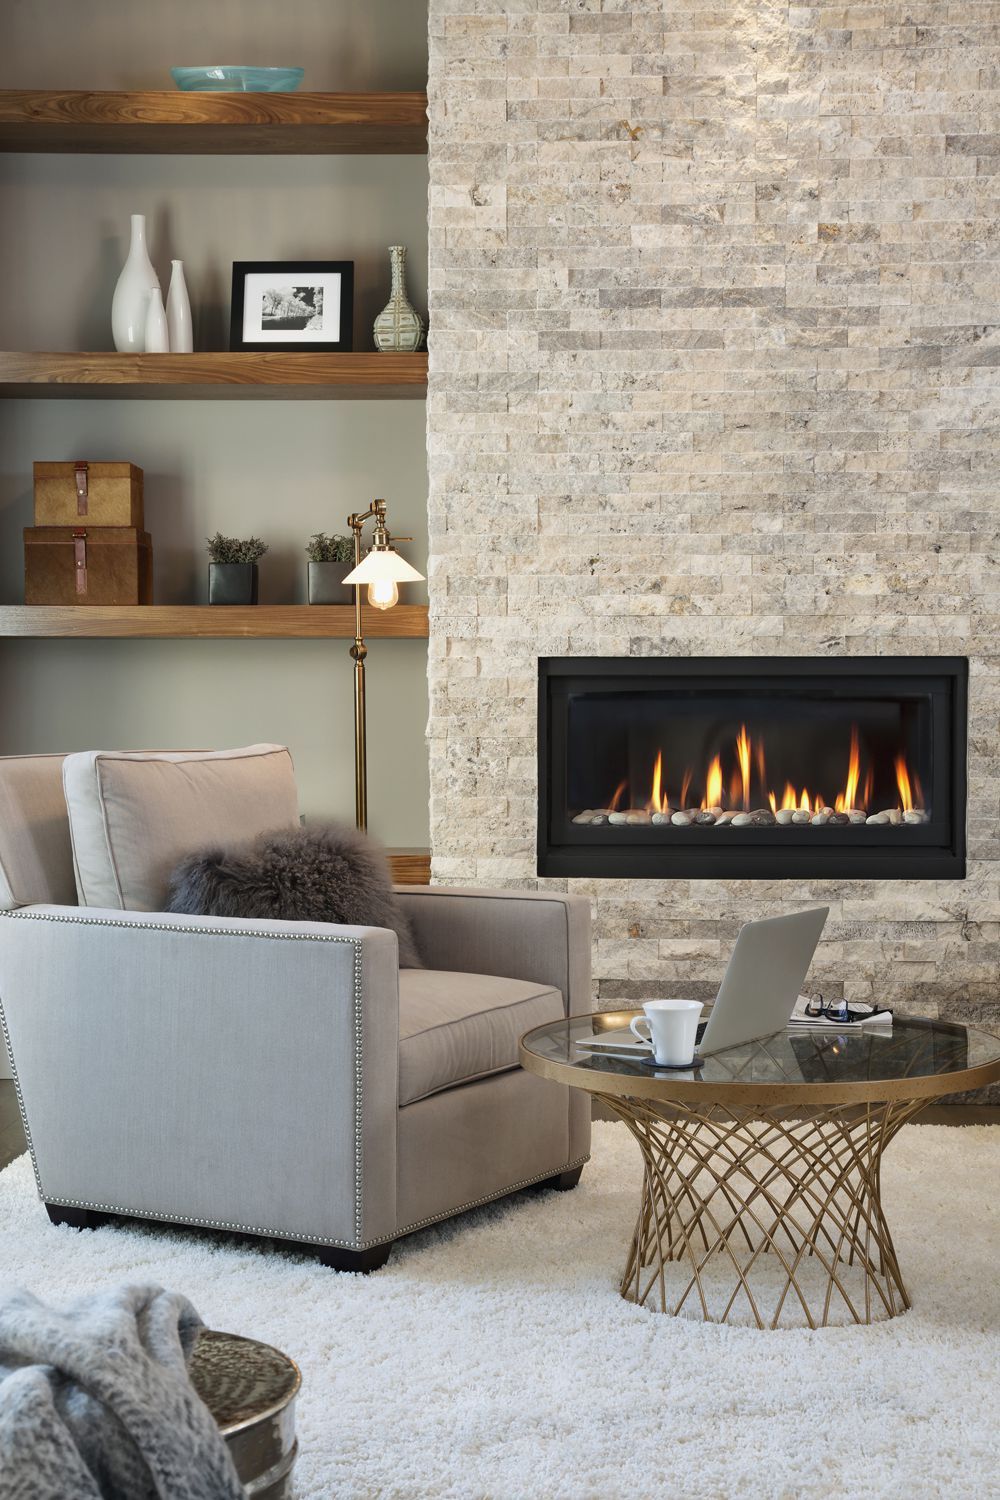 Small Fireplace Fresh 11 Cozy S Of Fireplaces that Will Make You Want to Stay